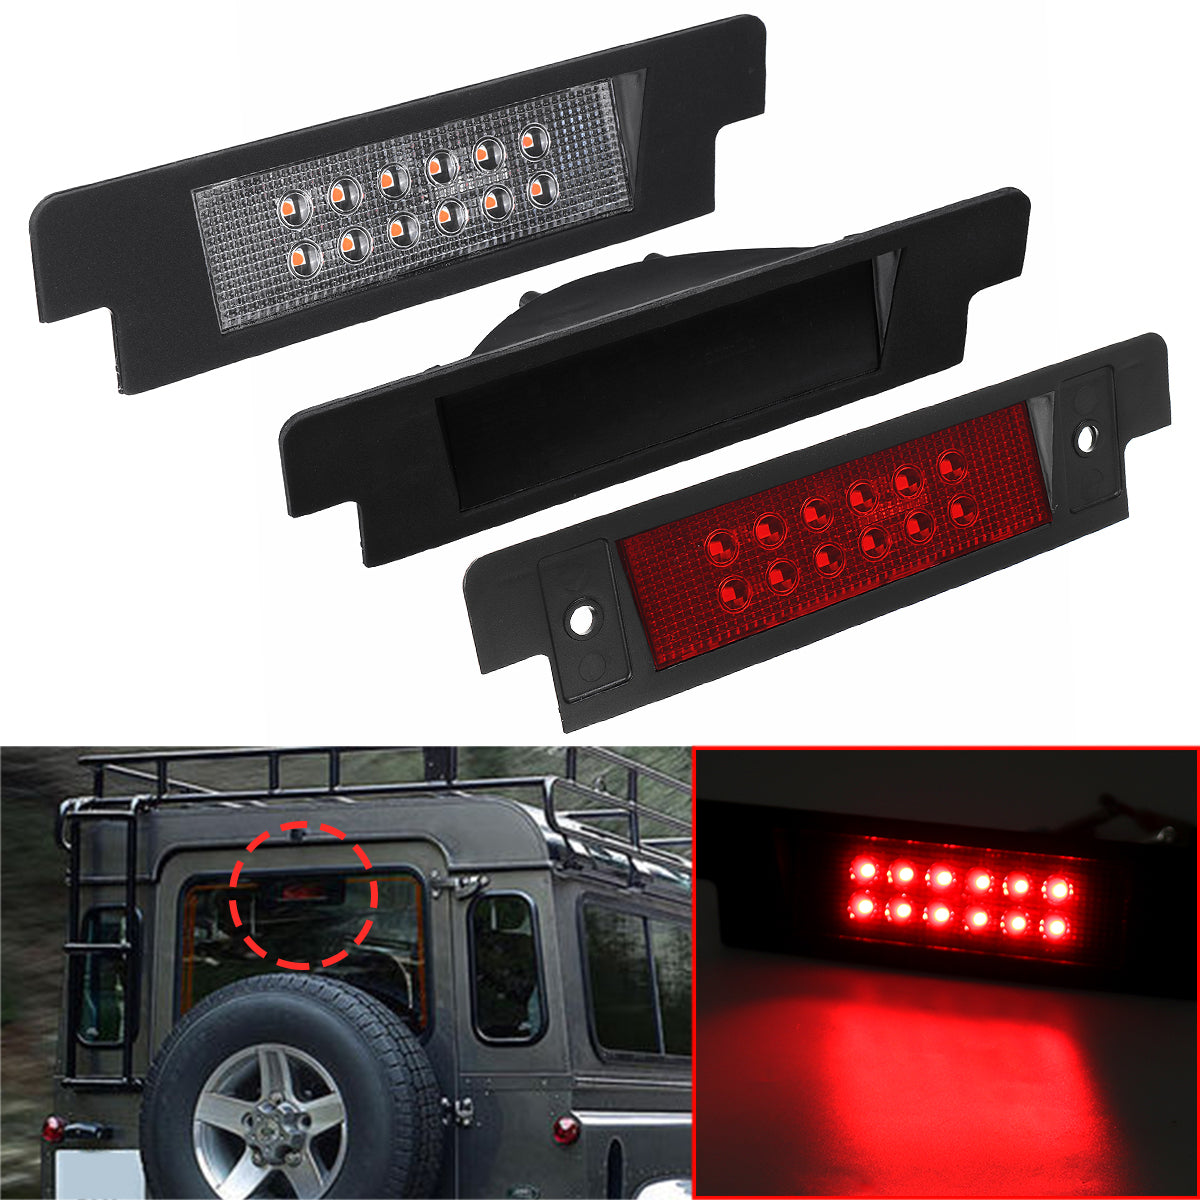 LED High Mount Stop Tail Brake Light Lamp Red for Land Rover Defender 1990 -2016 Discovery 1 2 1994-2004 - Auto GoShop